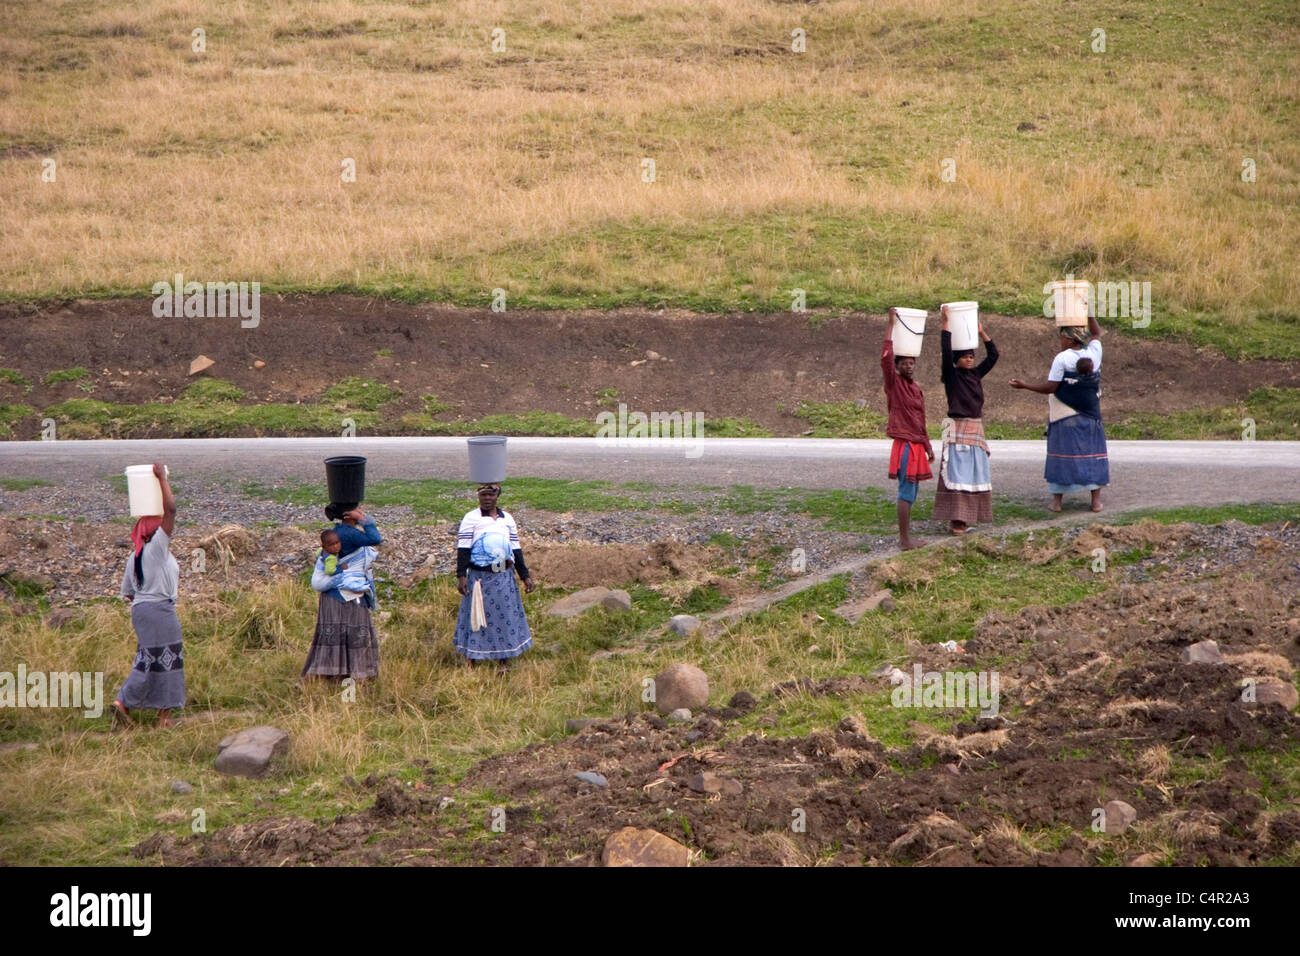 Local African women carrying babies as well as heavy loads on their heads, Transkei, South Africa Stock Photo